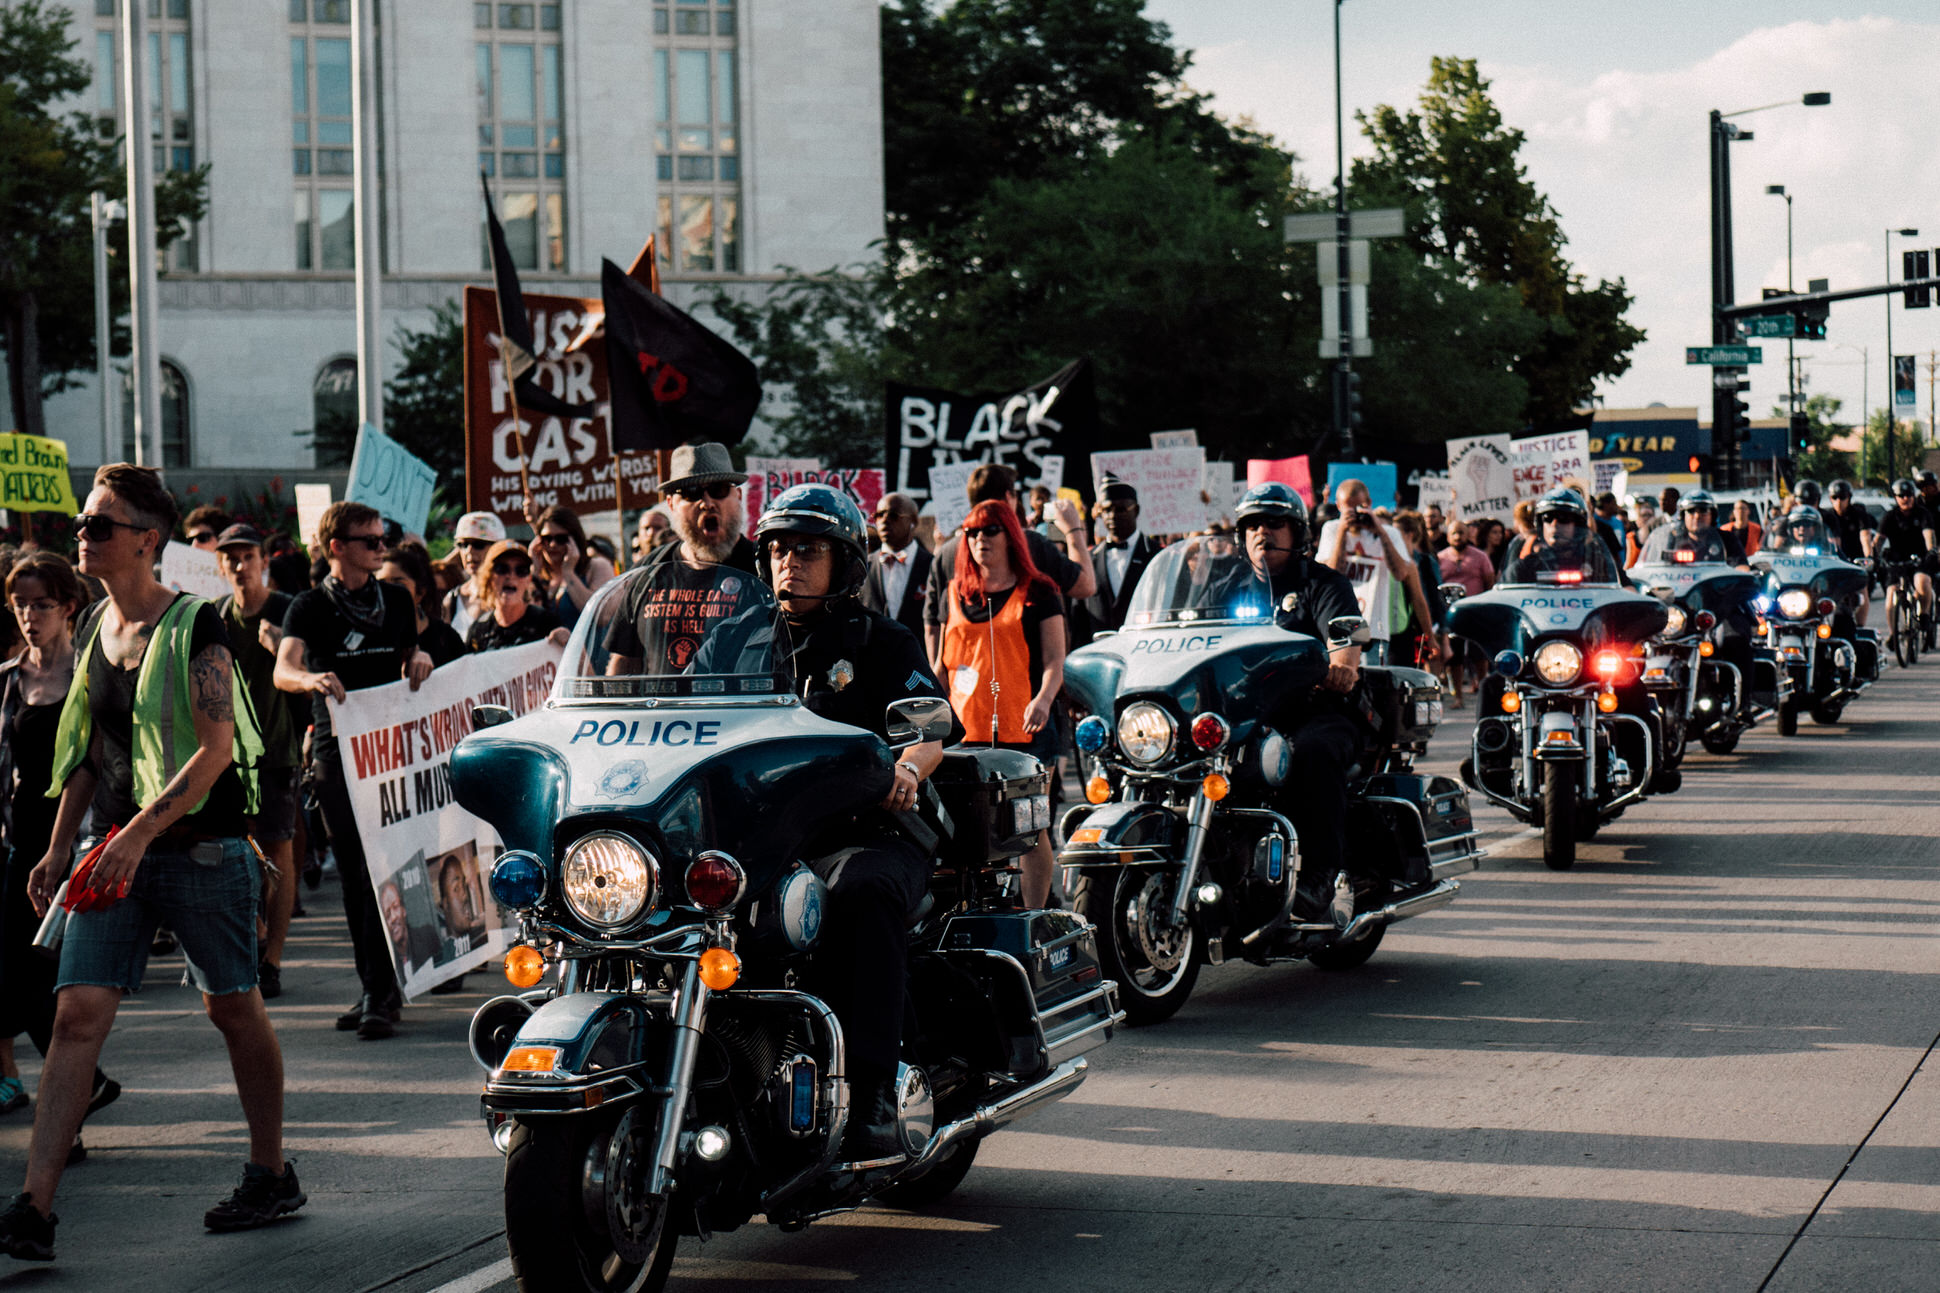 Protesters proceed from Five Points to Civic Center Park via Broadway. Police on bicycles and motorcycles line the road as protesters chant "No justice no peace".